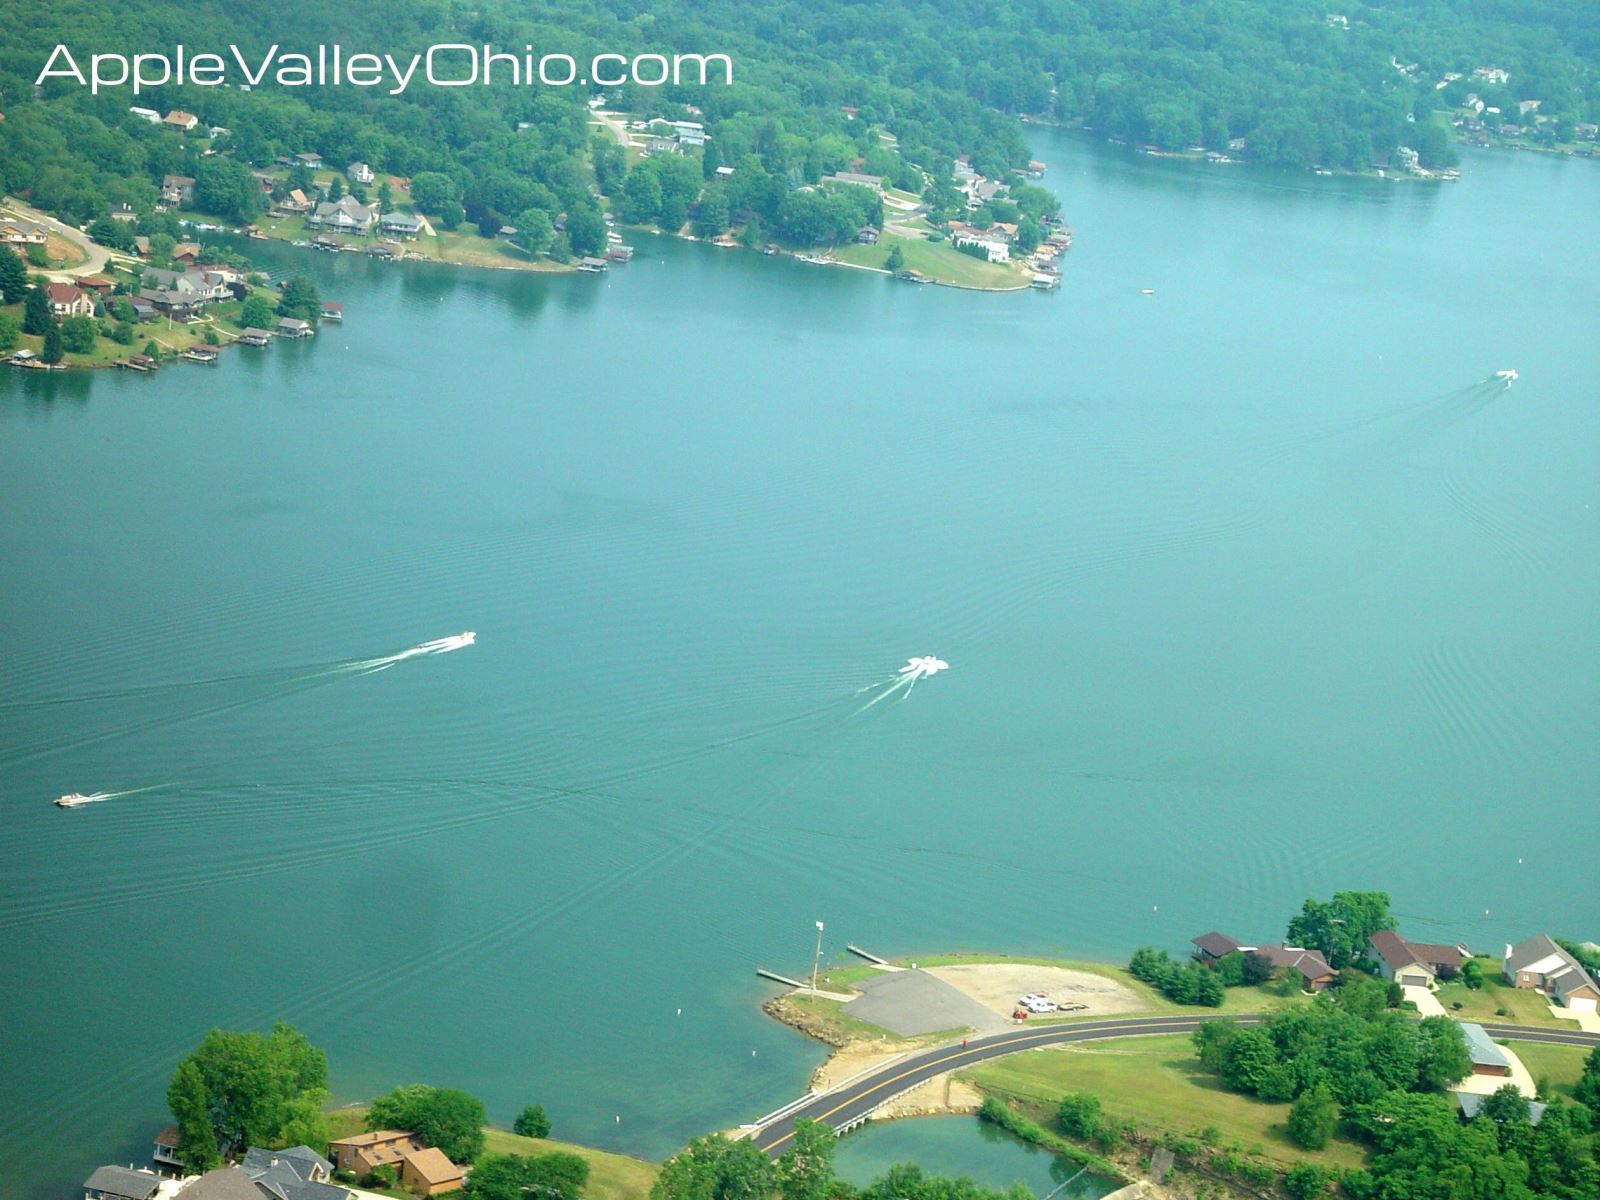 Aerial Photo Taken During an Airplane Flight Over The Apple Valley Lake